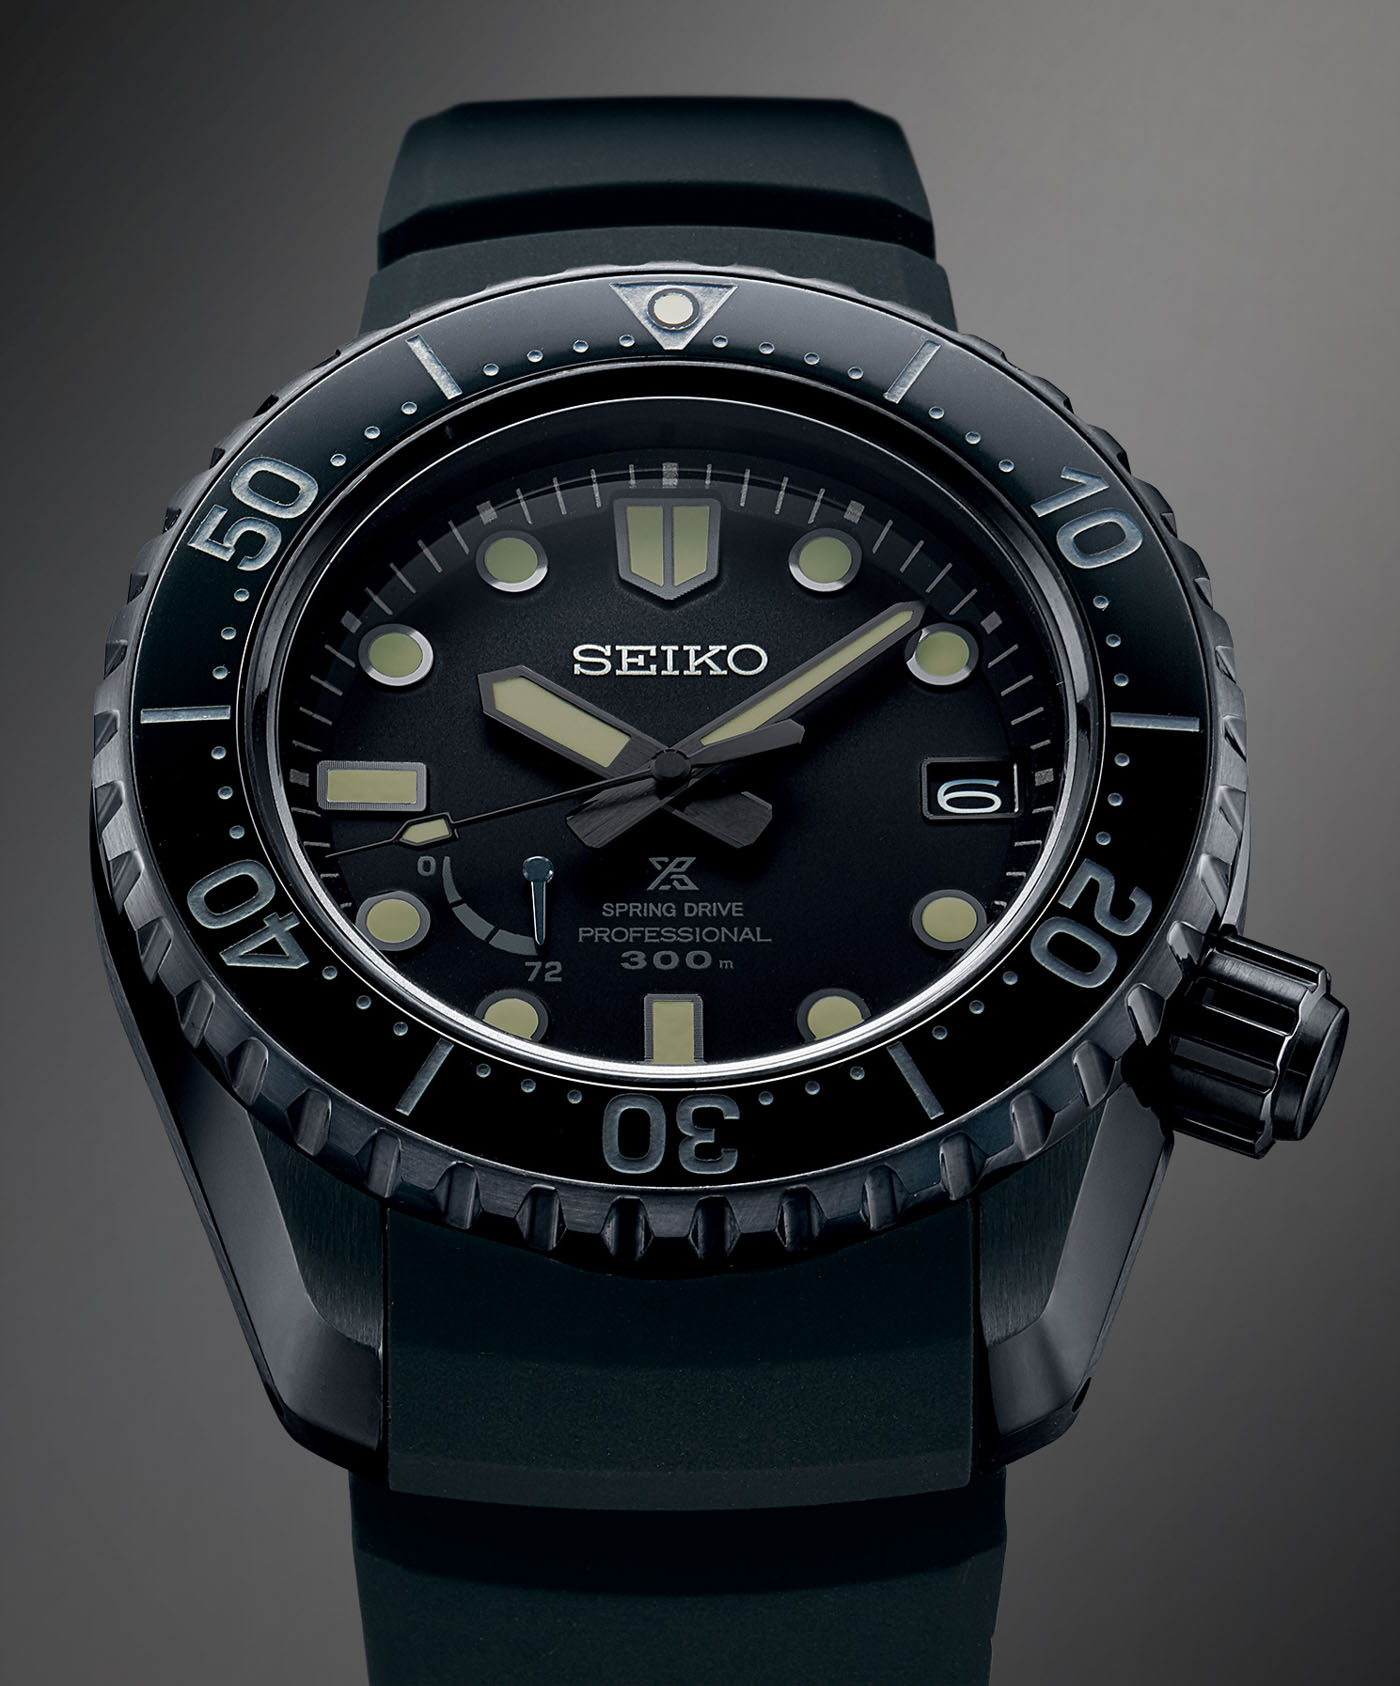 Seiko Prospex LX Collection With Spring Drive Movements For BaselWorld 2019  | aBlogtoWatch